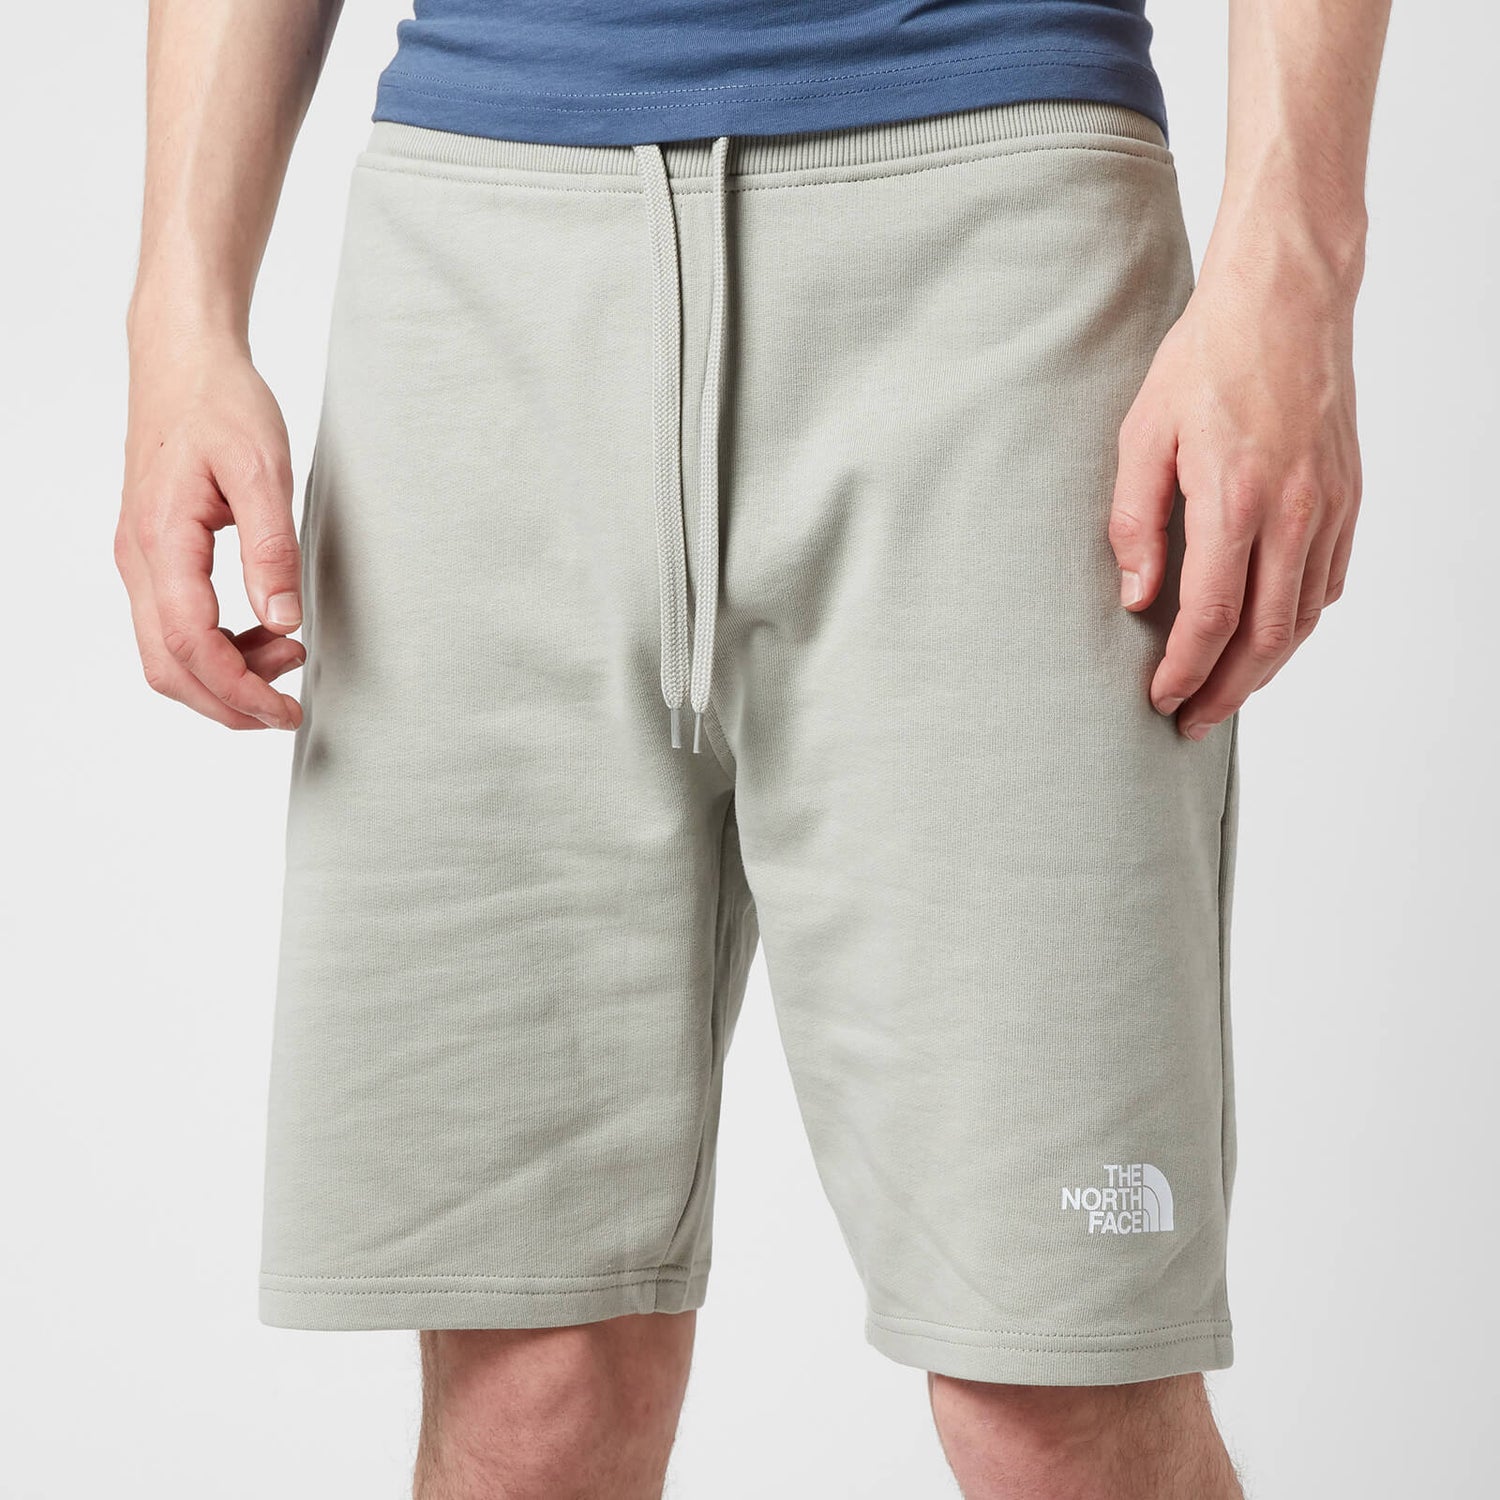 The North Face Men's Standard Shorts - Wrought Iron